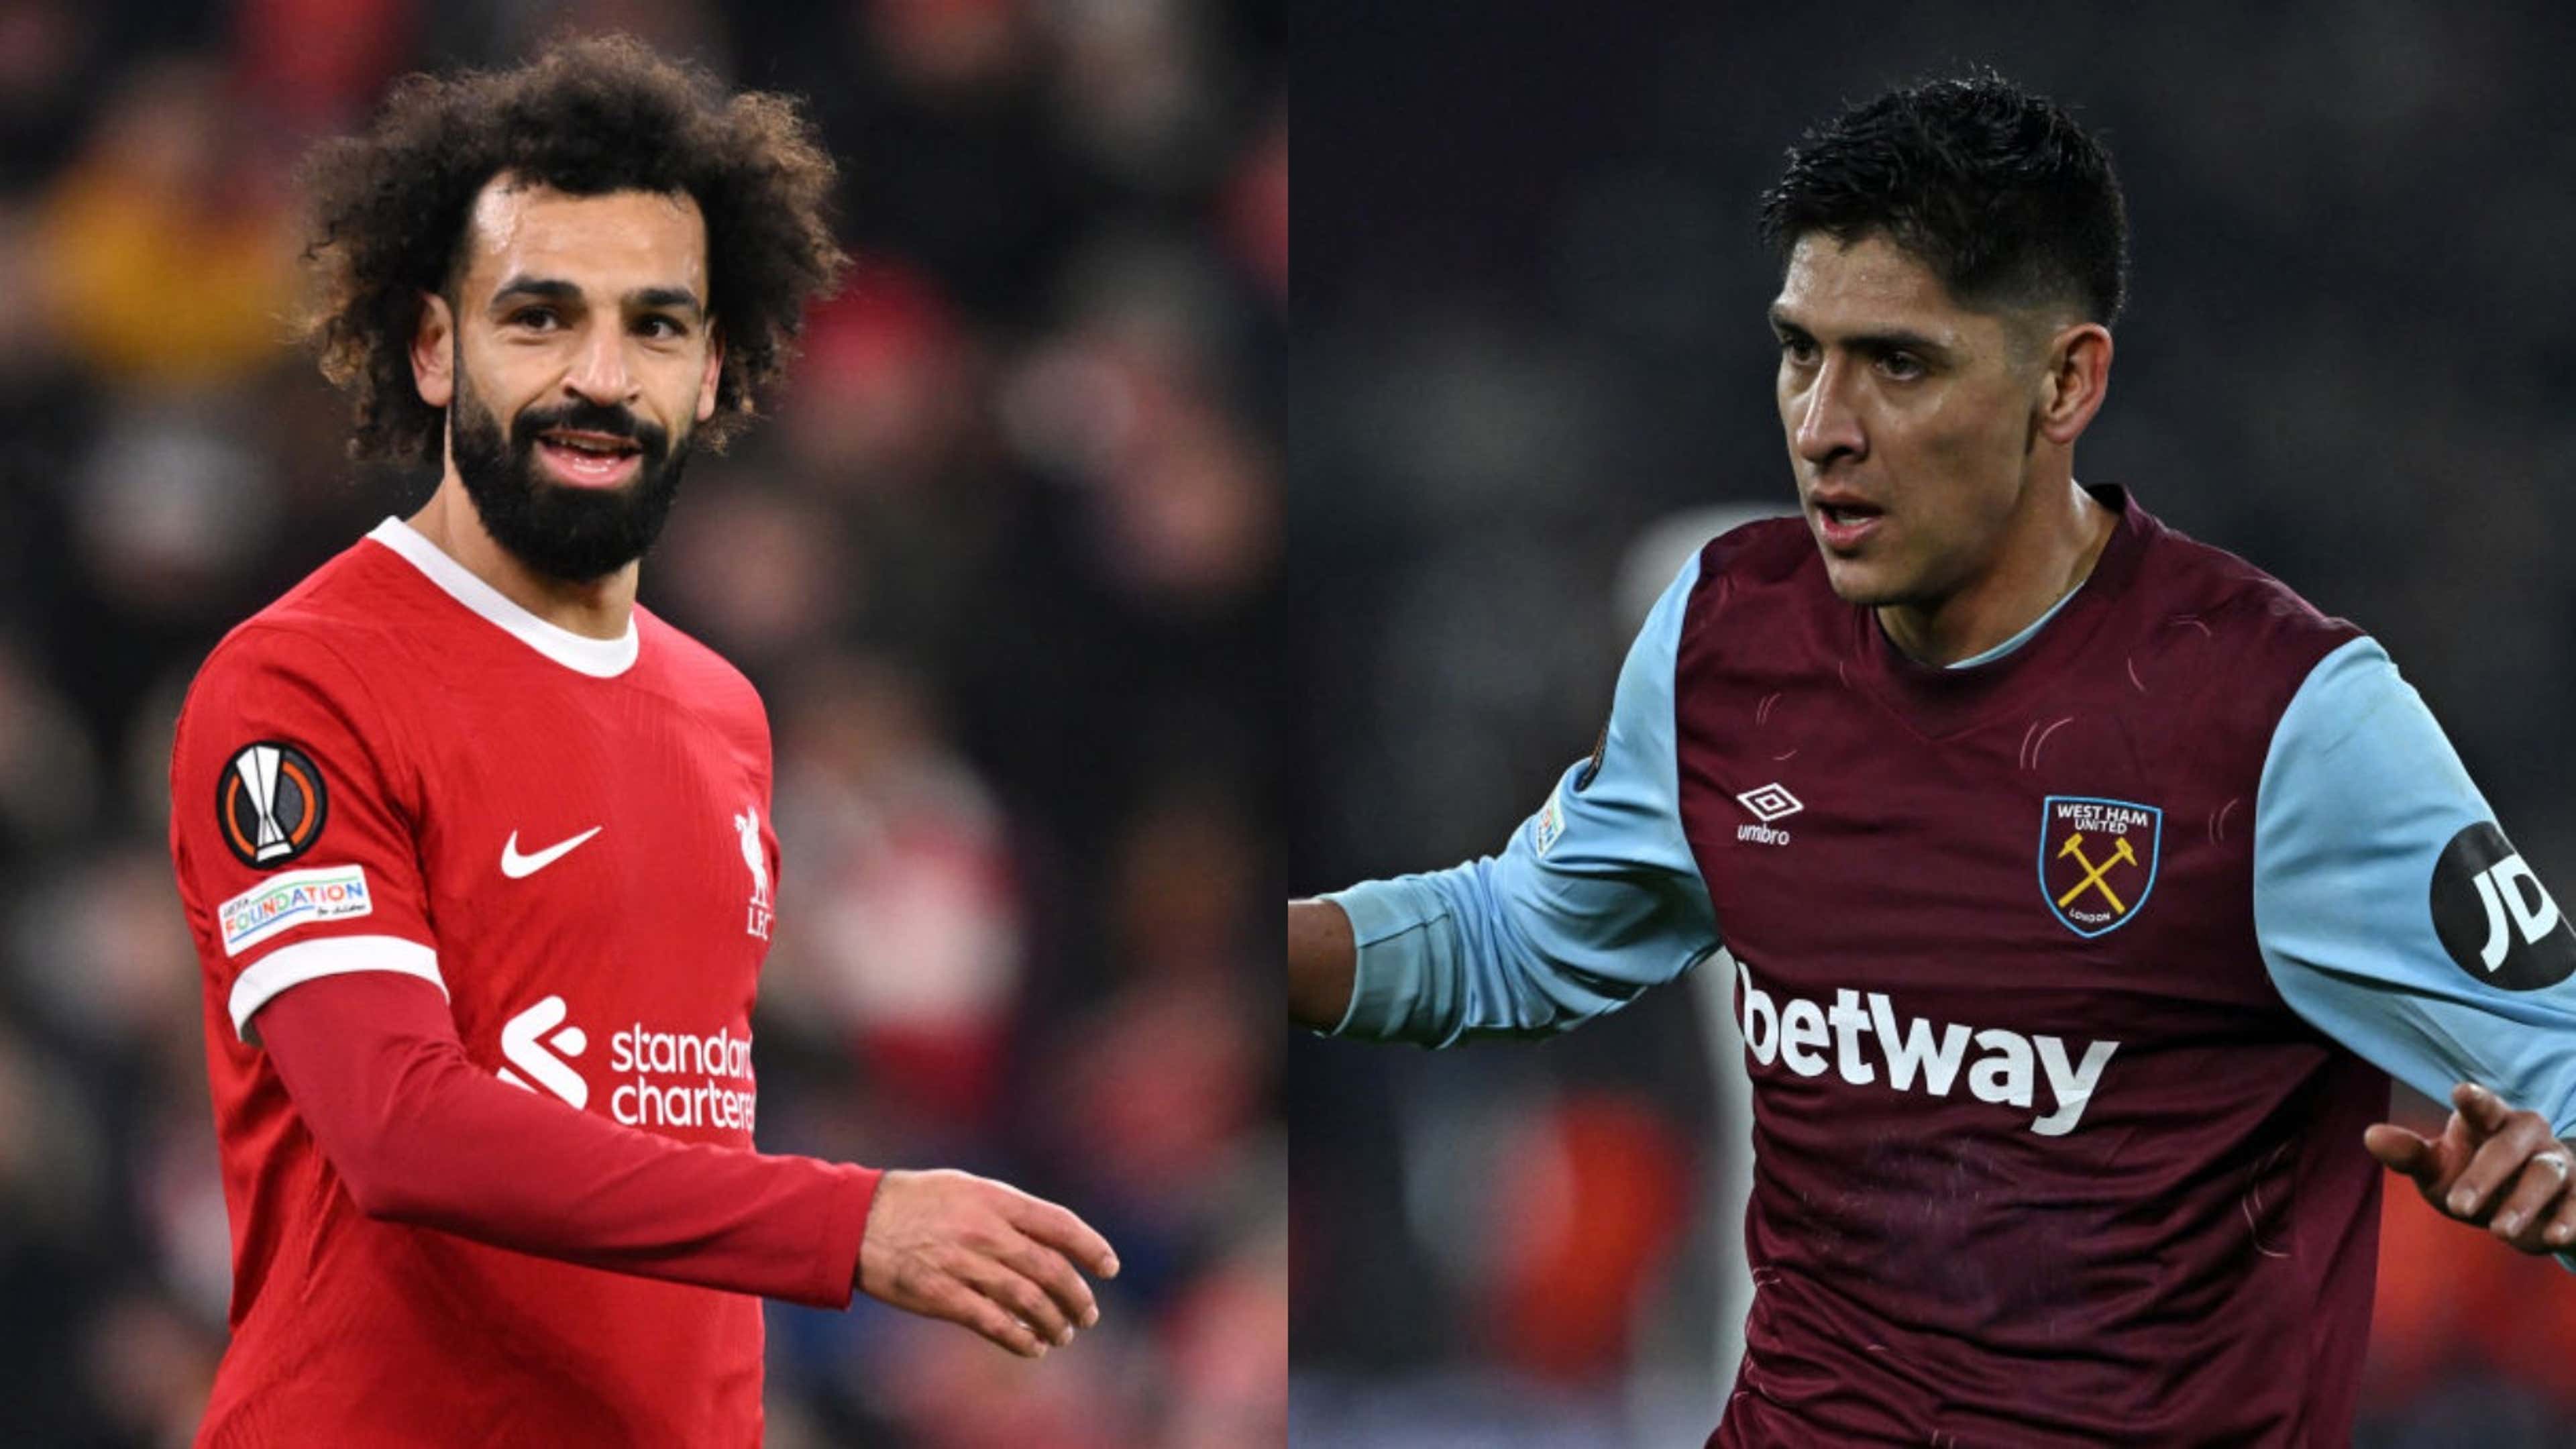 Liverpool vs West Ham: Where to watch the match online, live